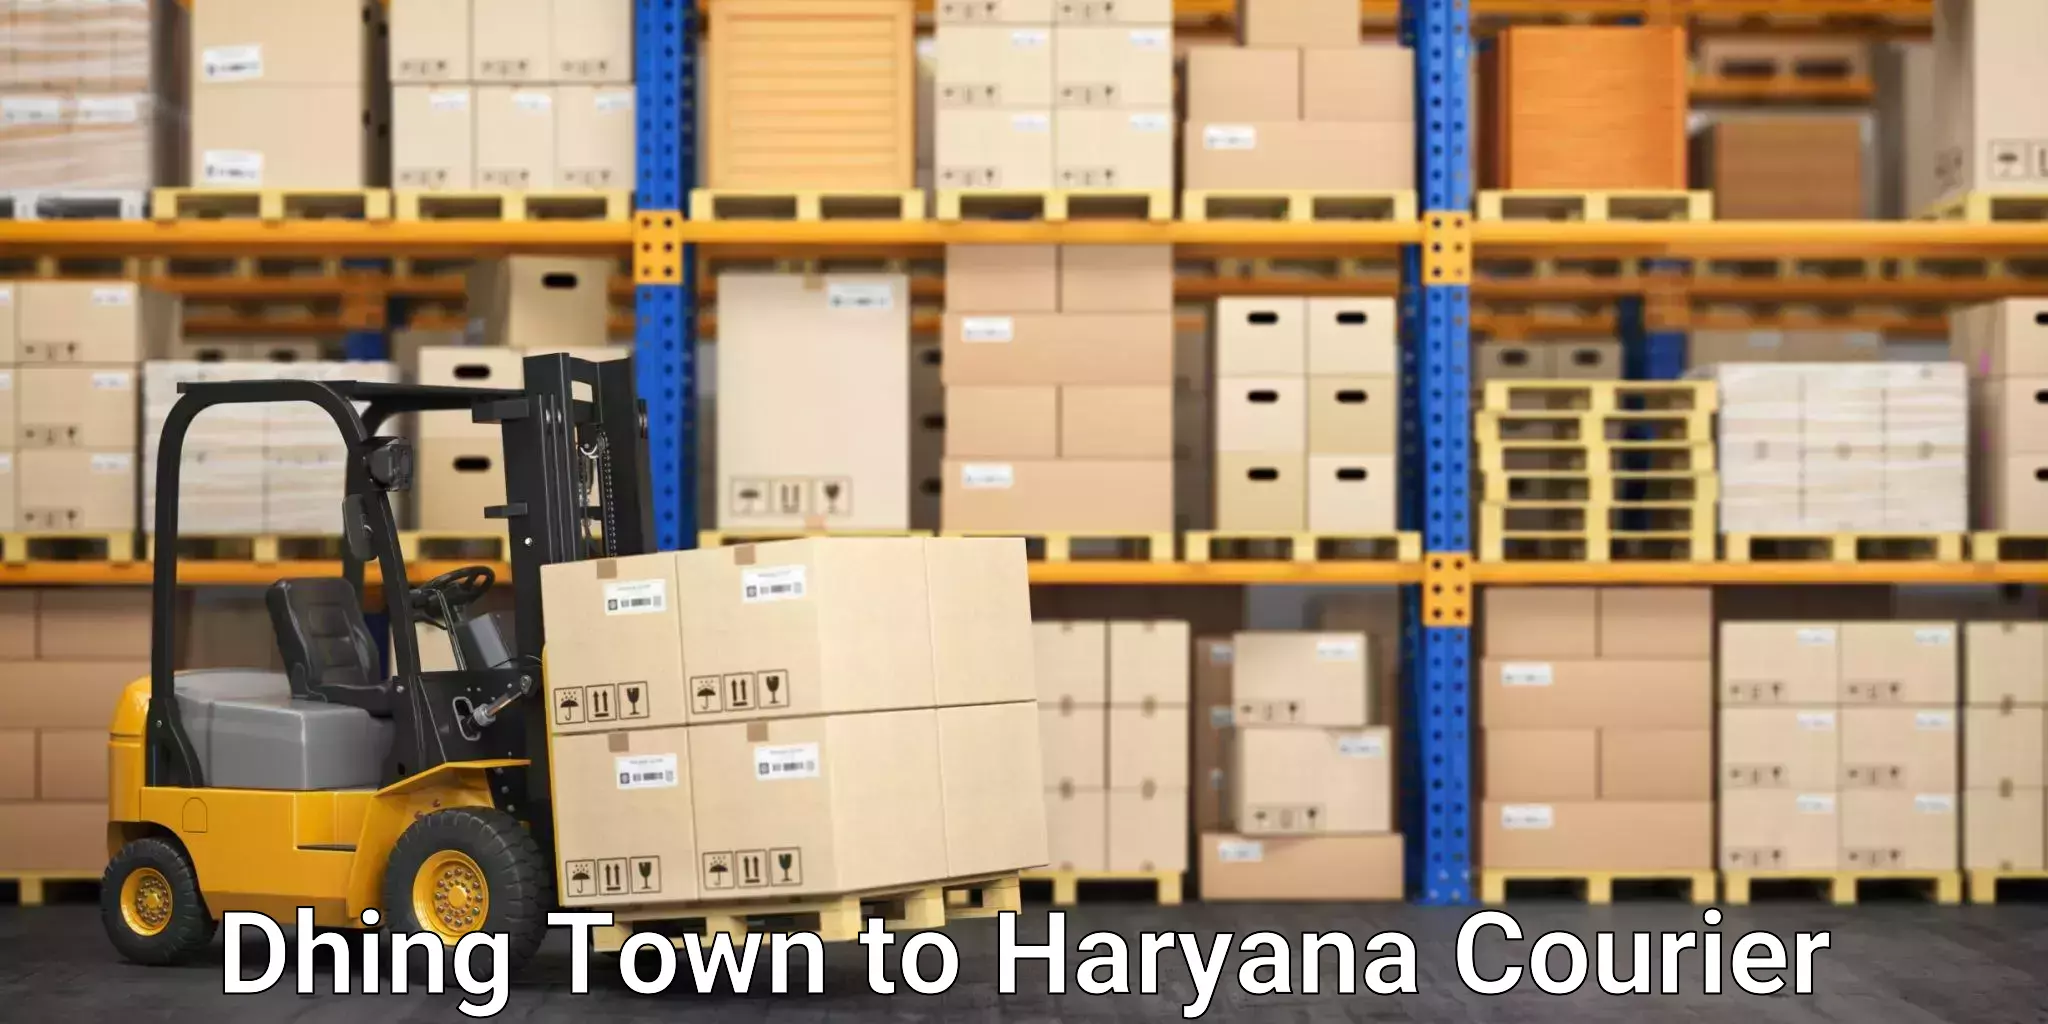 Reliable shipping partners Dhing Town to Haryana